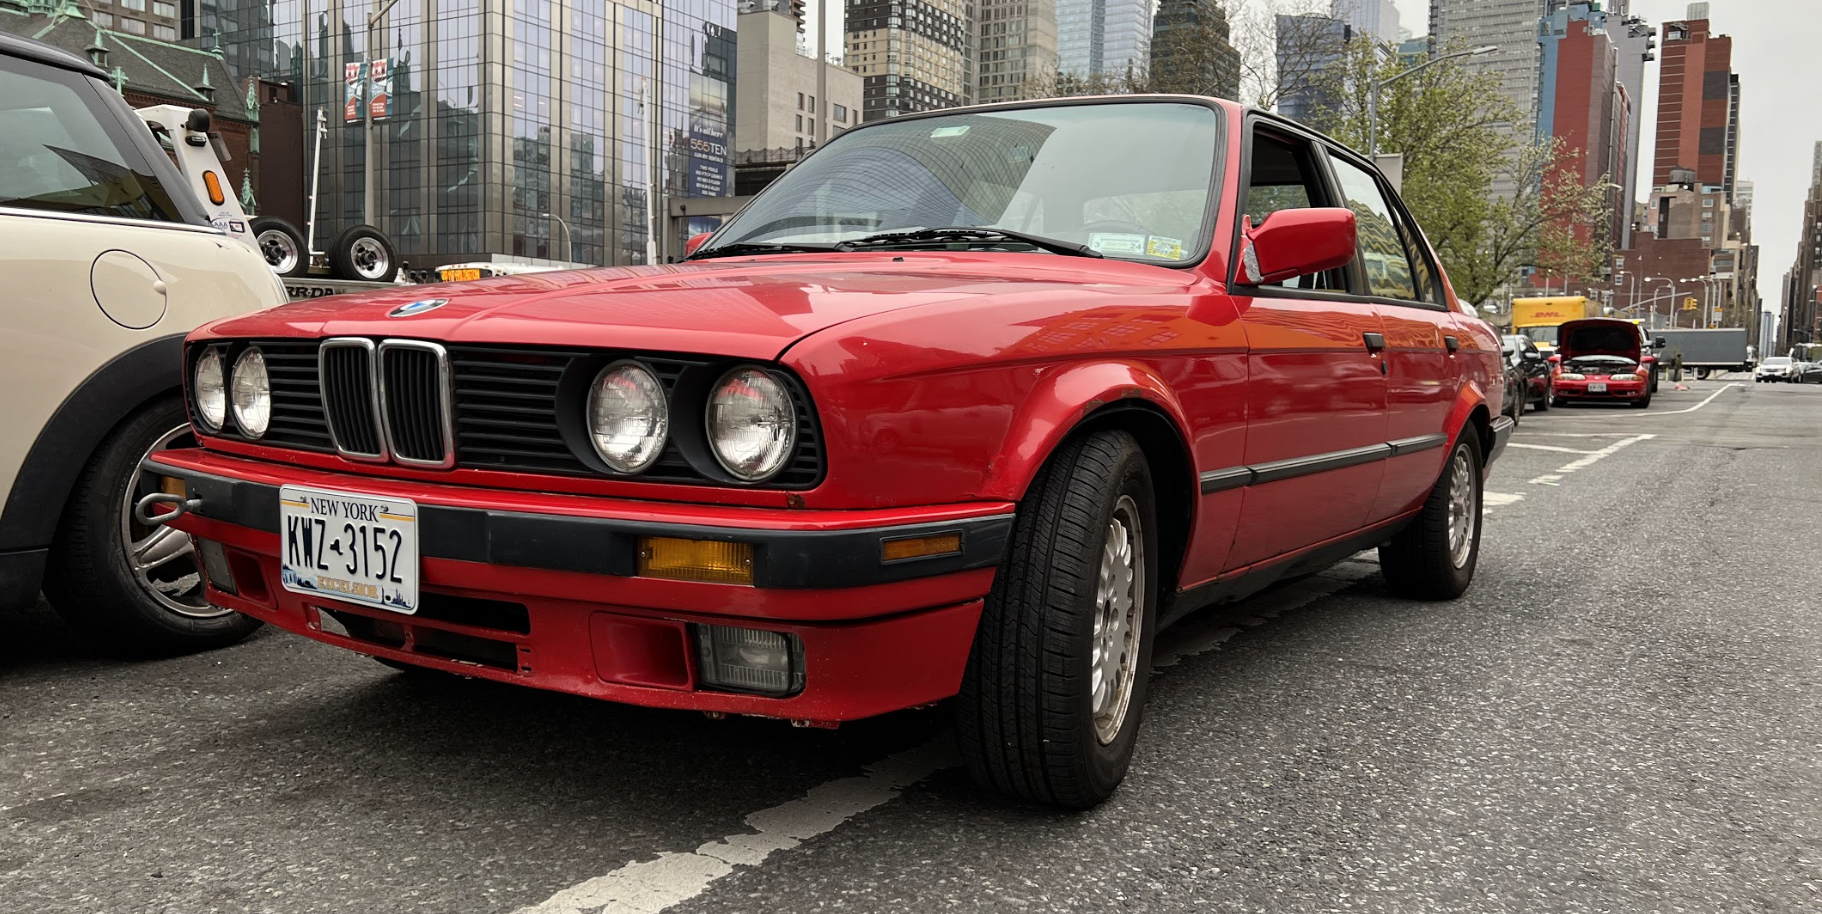 My 318i Project Is Officially on the Road Thanks to Clever Zip-Tie Usage